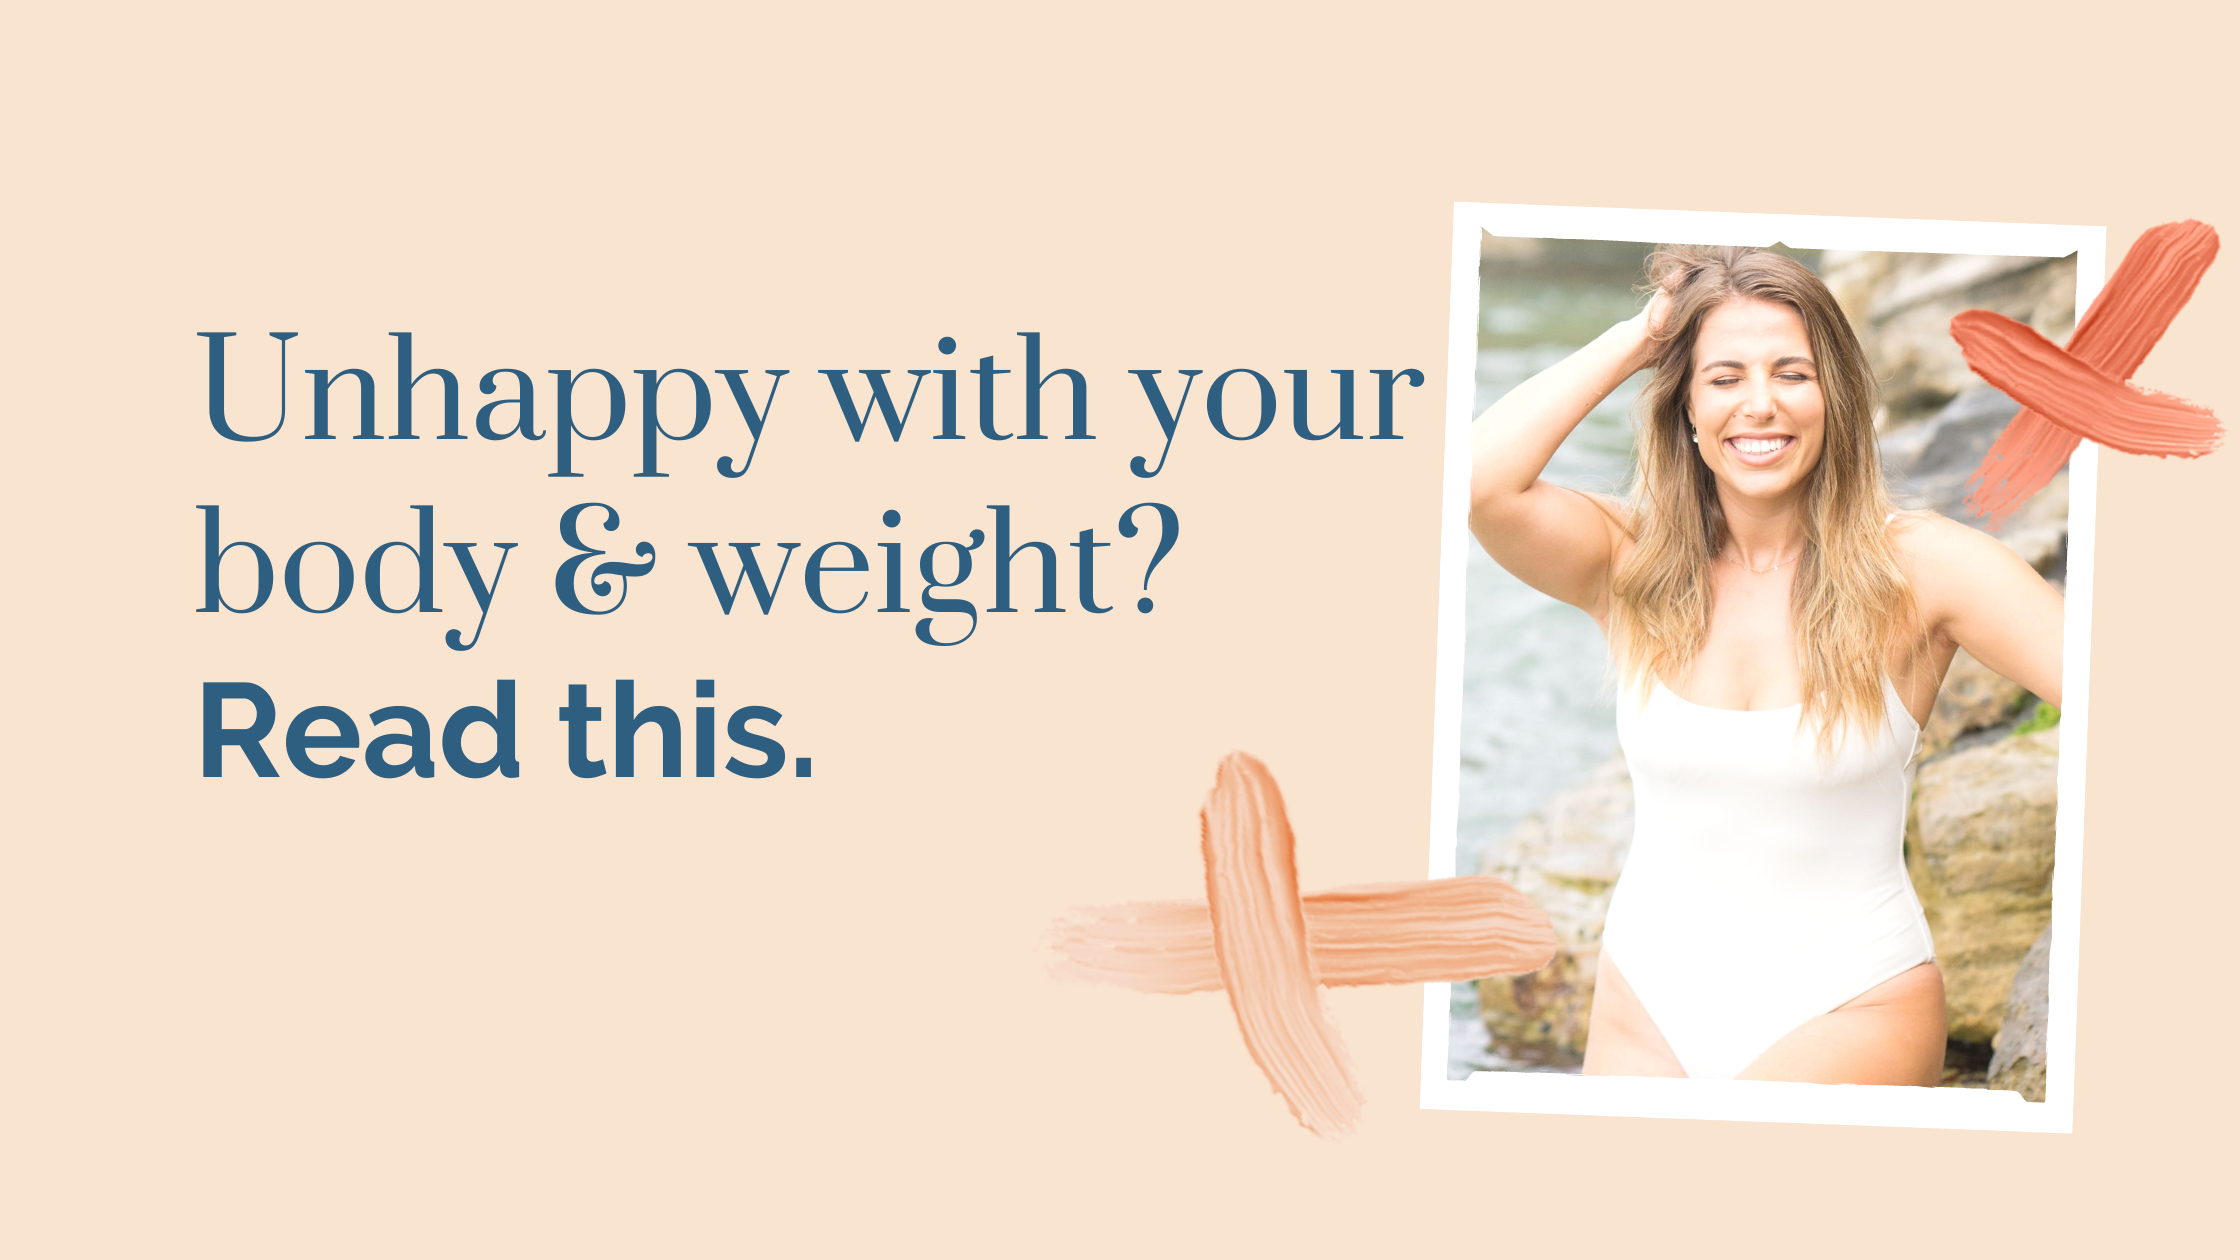 Unhappy with your body and weight? Read this. Image: Lyndi Cohen